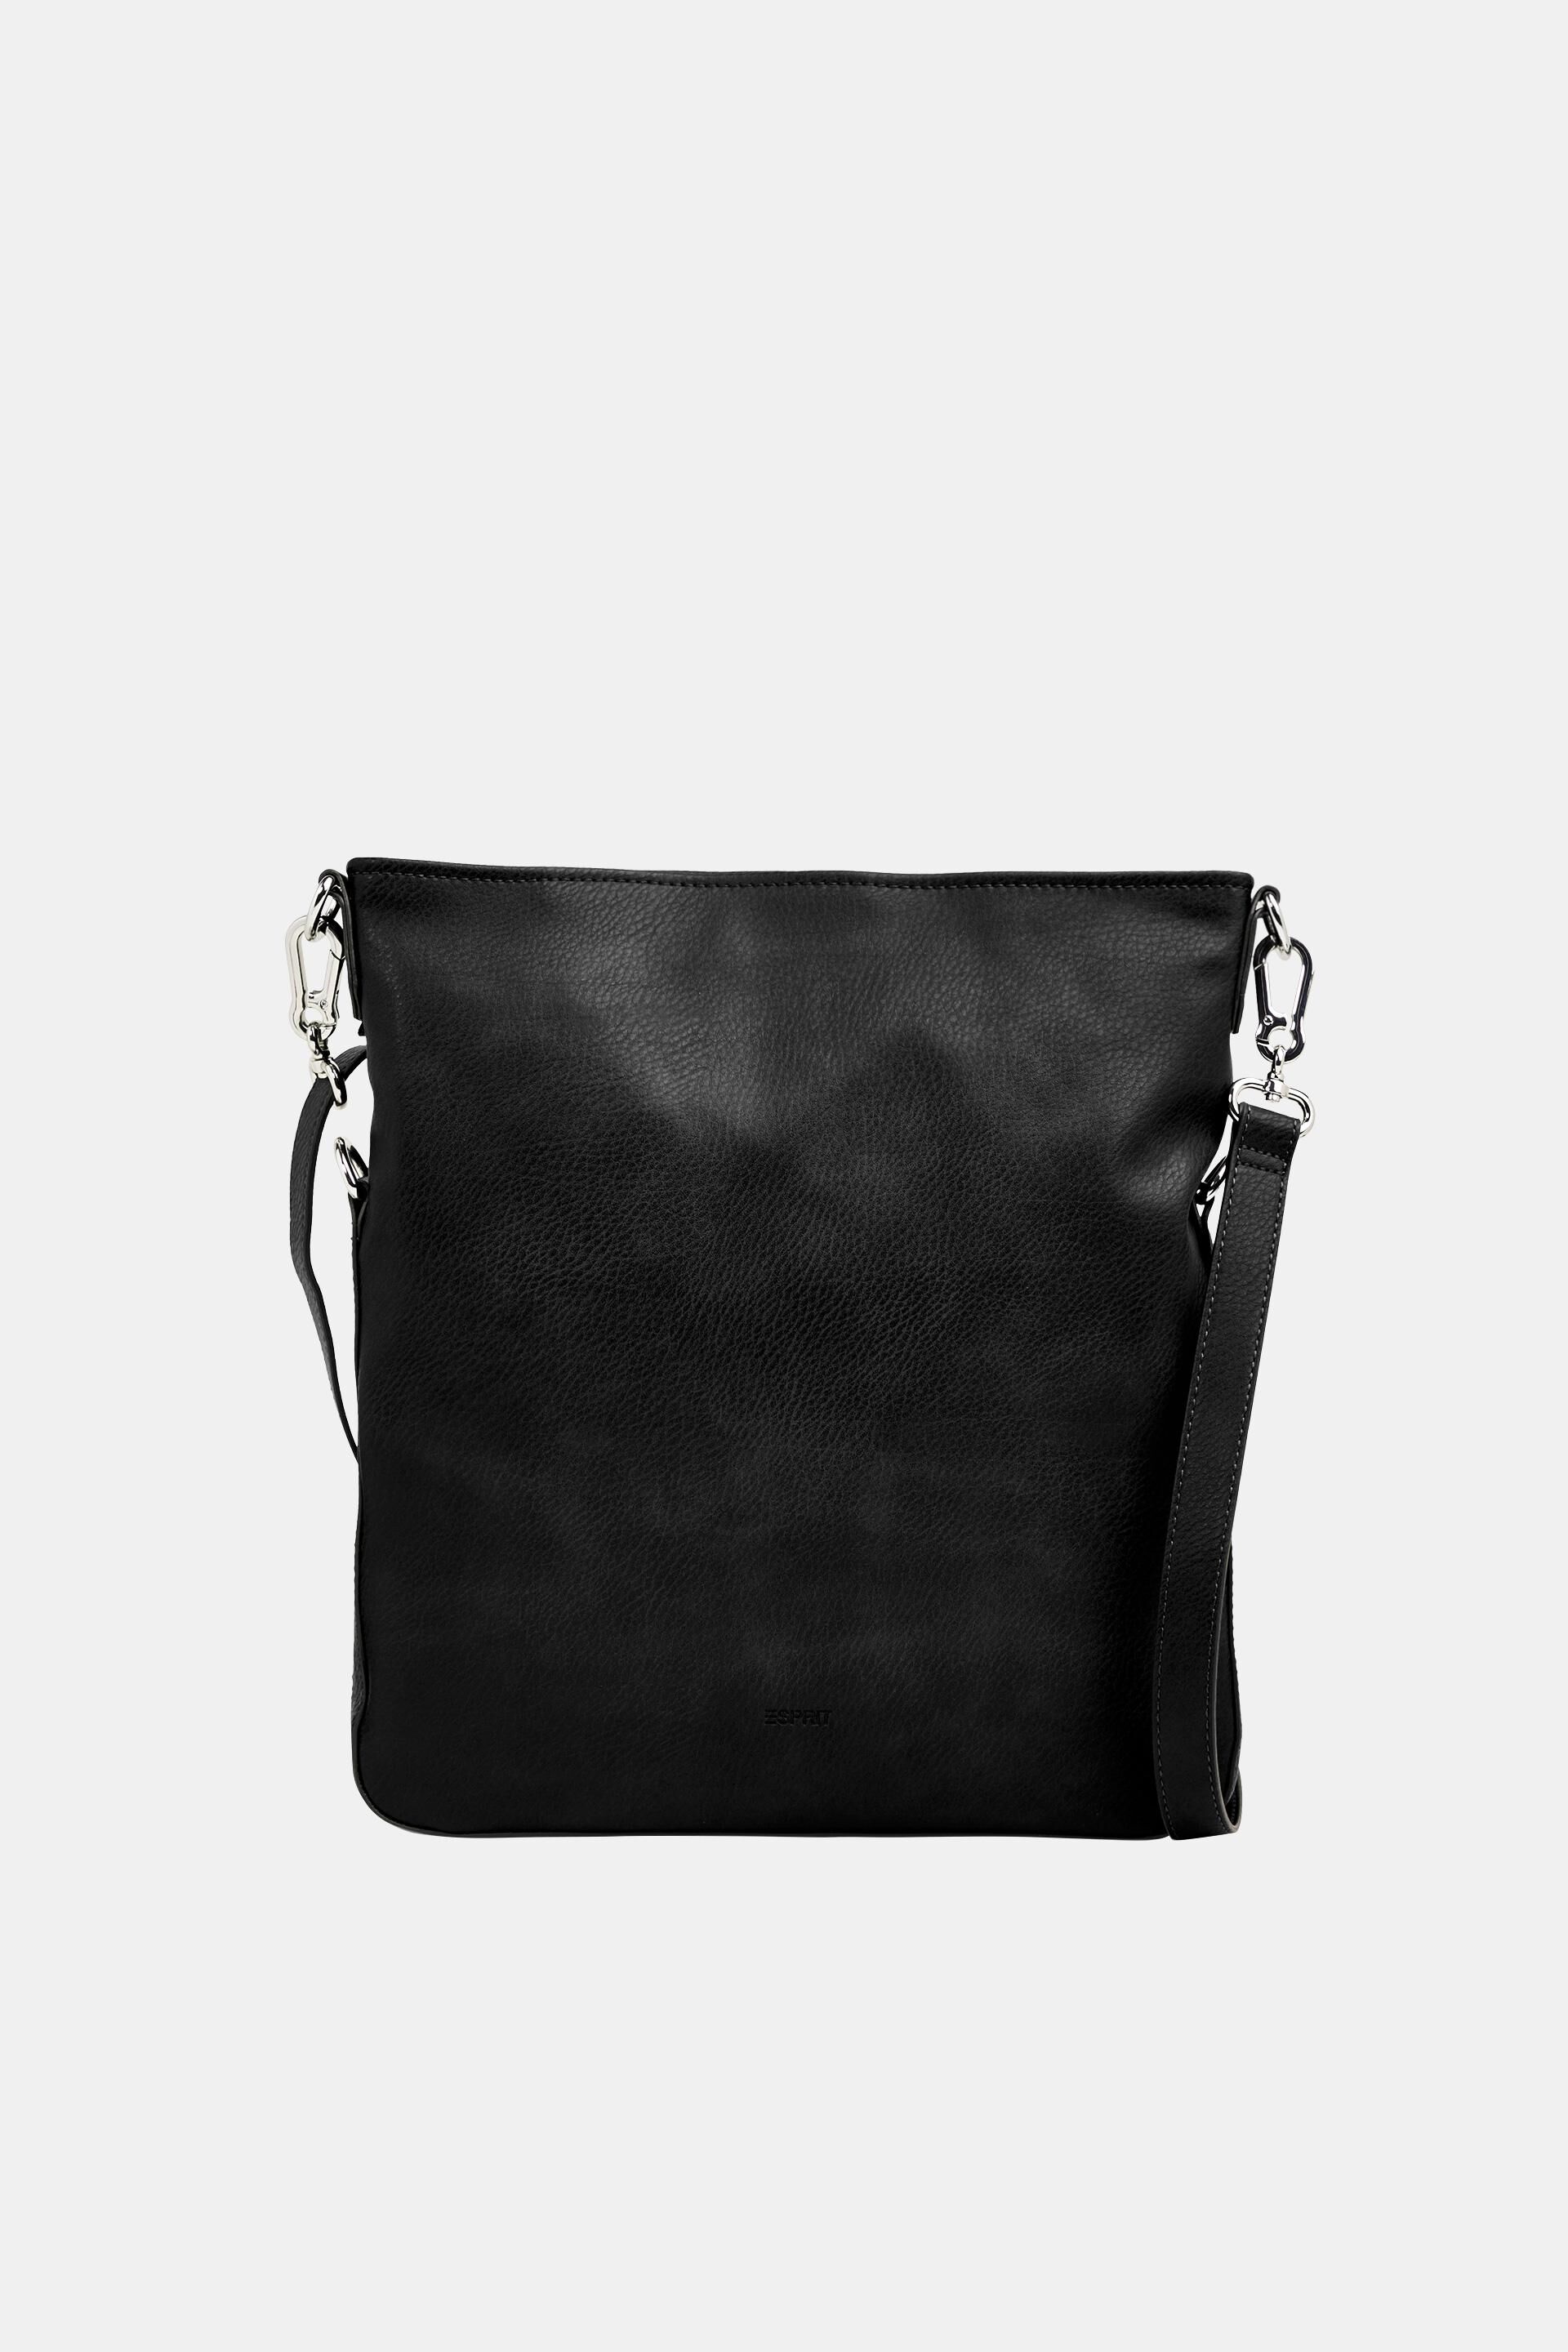 Esprit bag leather in Flapover faux